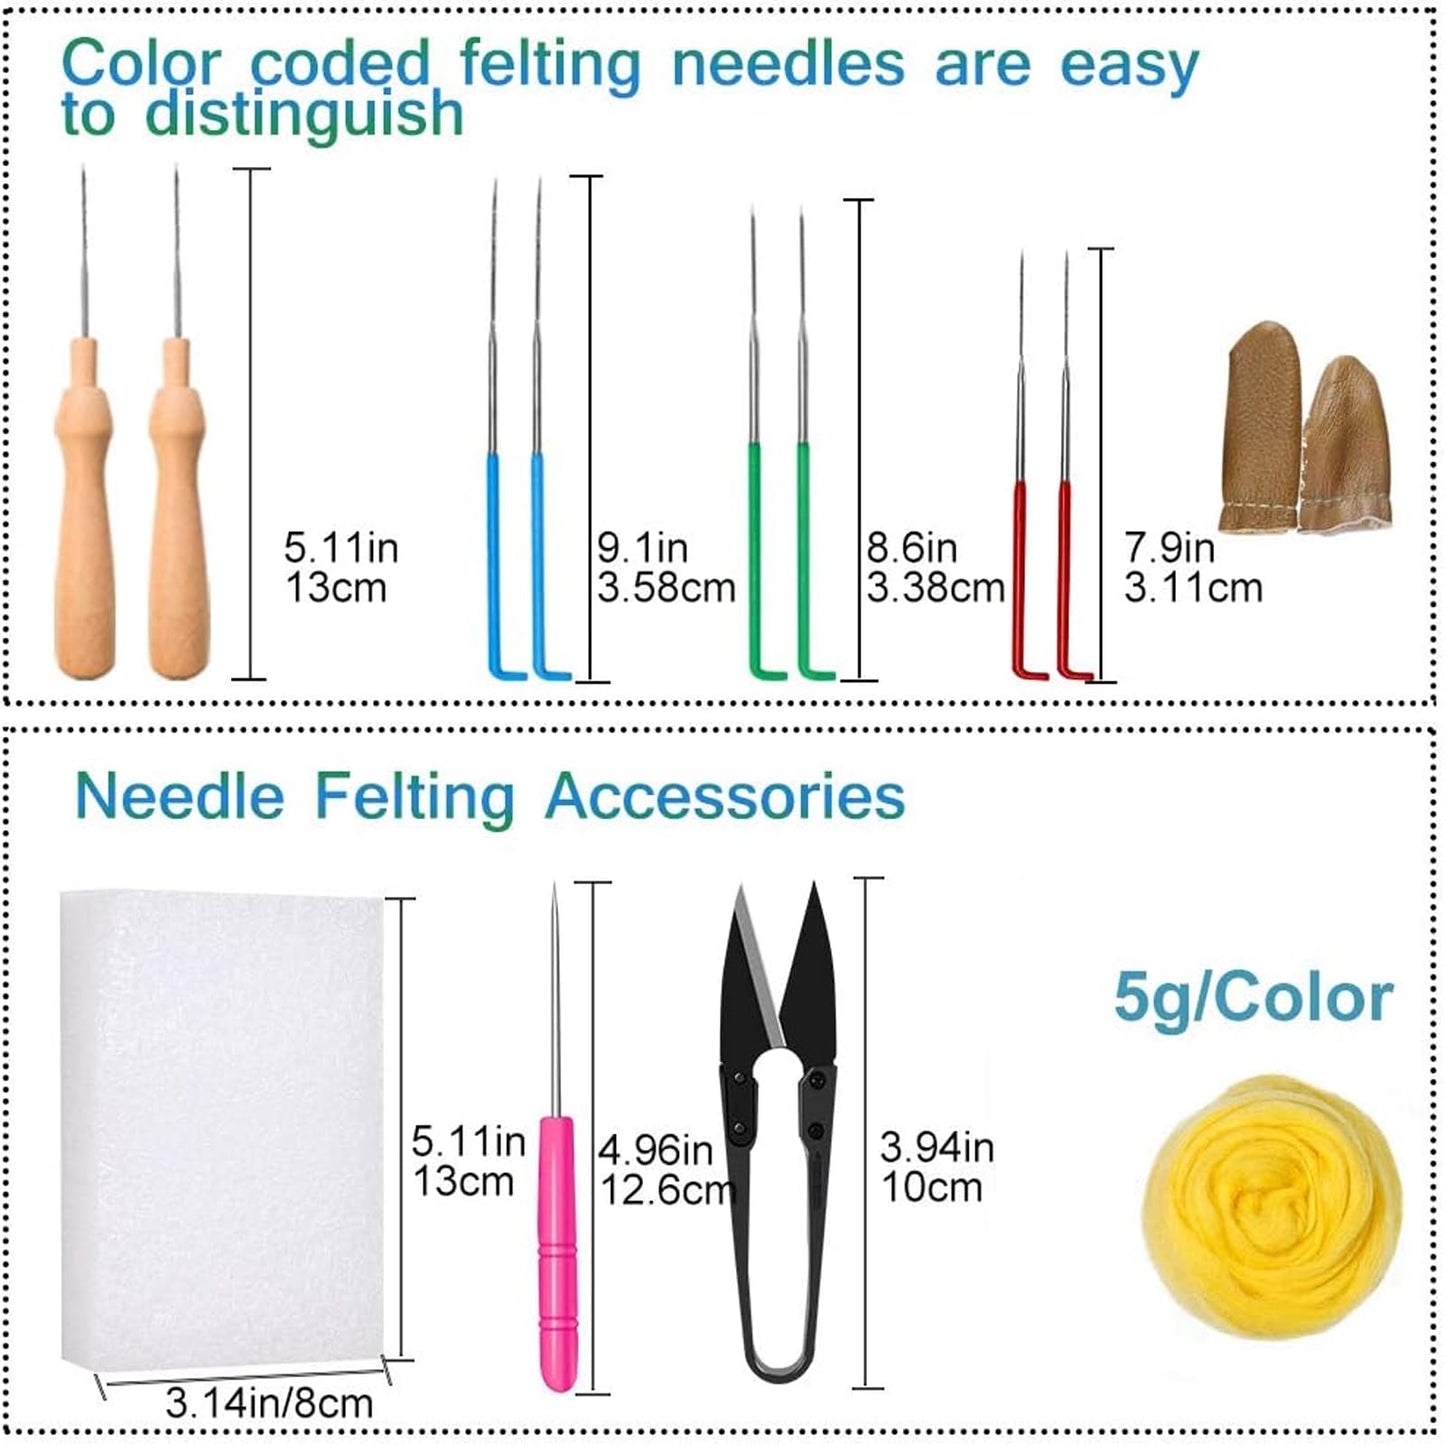 JUPEAN Needle Felting Kit, Wool Roving (5g/Color), Complete Needle Felting Starter Kit with Basic Felt Tools and Supplies Wool Fibre Spinning Craft